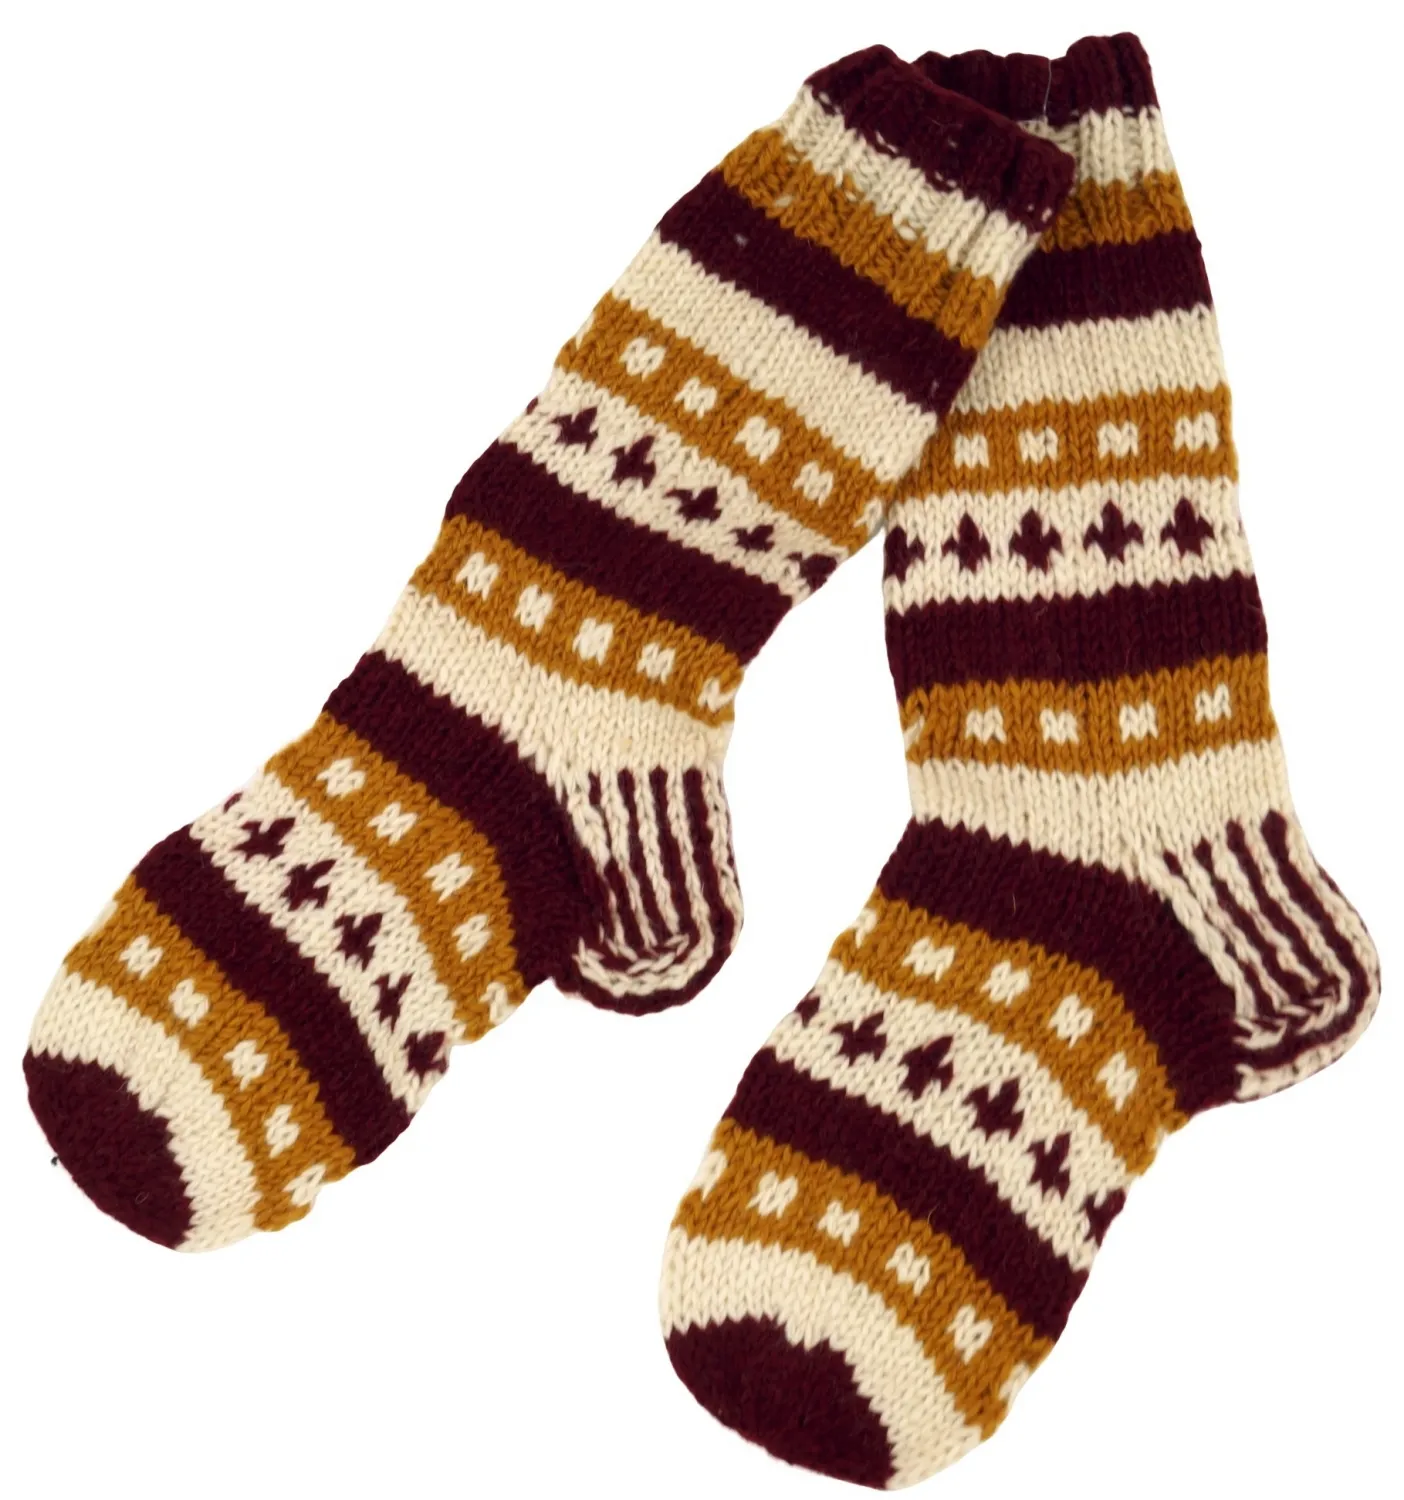 At Cheap Price Long Socks For Women Hand Knitted Women Indoor Shoes Long Socks Wool Hand Made In Nepal